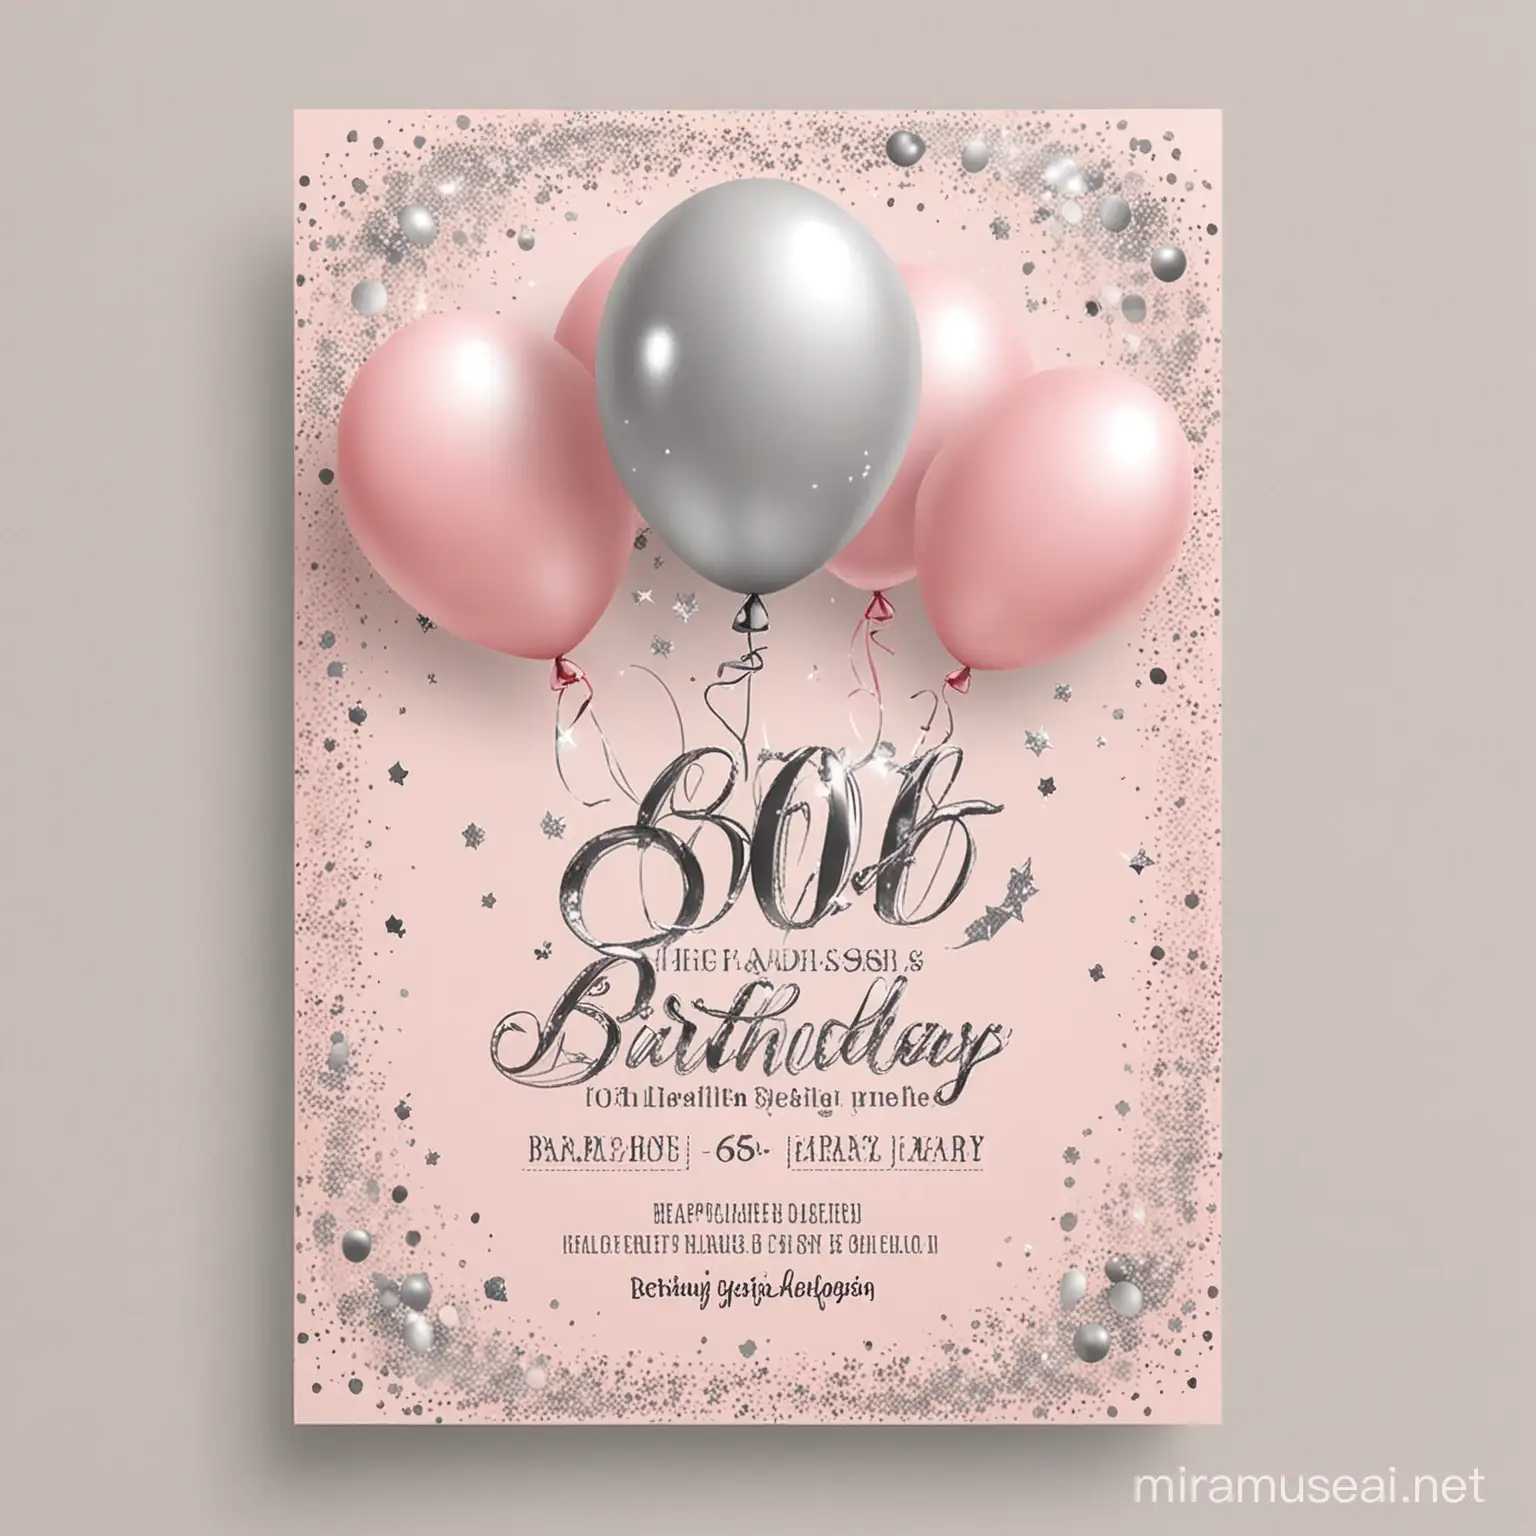 Elegant Glittery 60th Birthday Celebration with Soft Pink and Silver Balloons